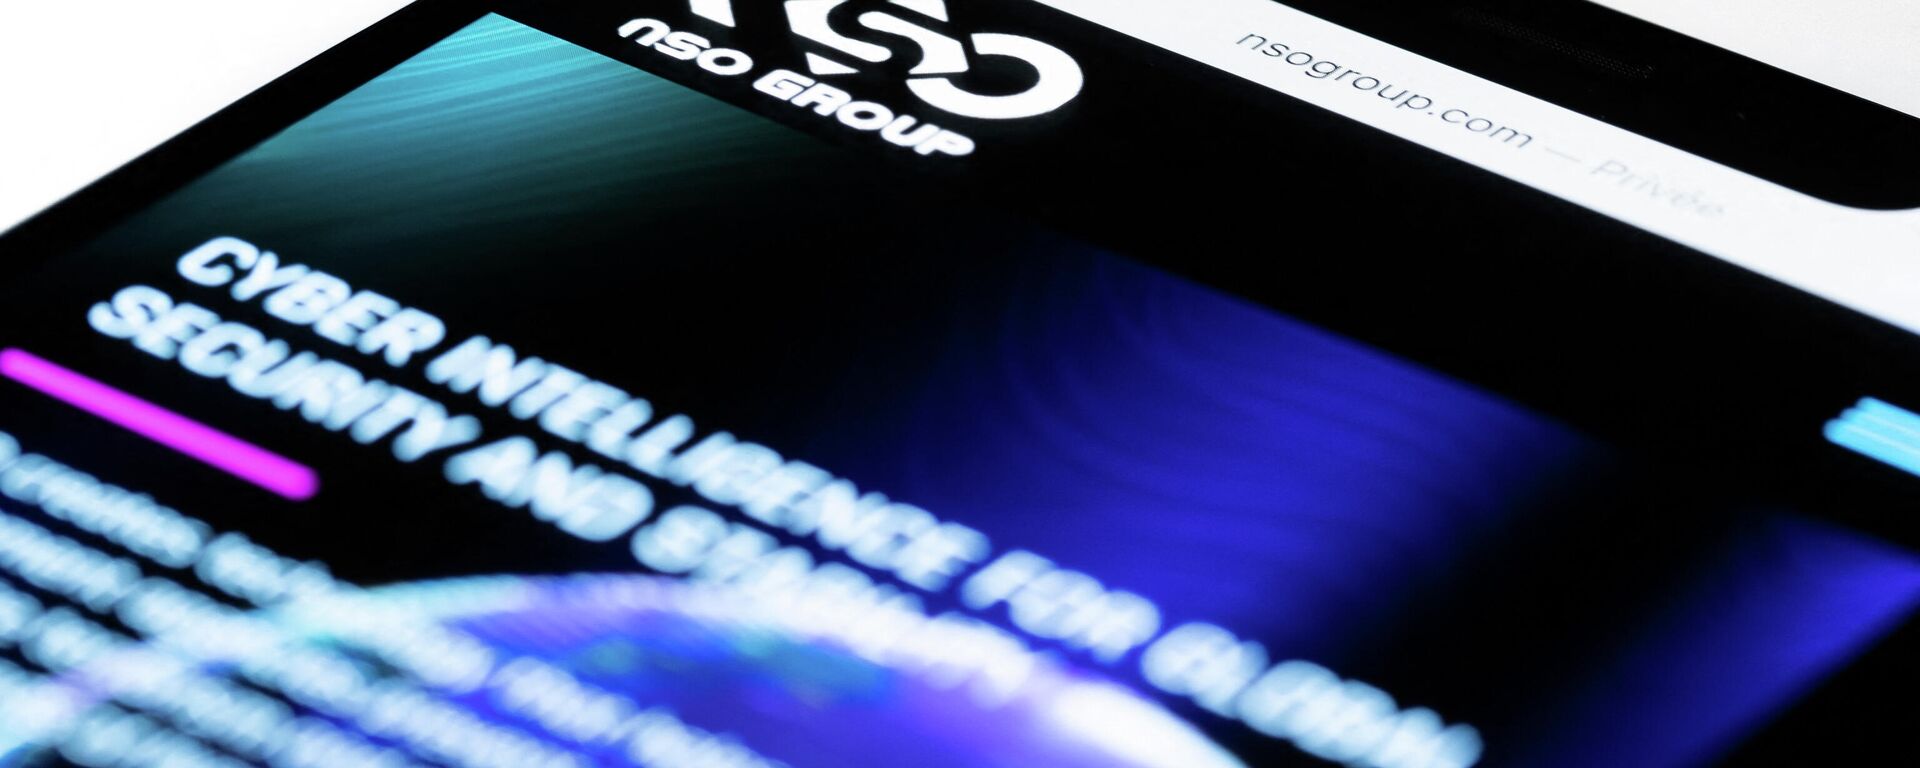 This studio photographic illustration shows a smartphone with the website of Israel's NSO Group which features 'Pegasus' spyware, on display in Paris on July 21, 2021. - Private Israeli firm NSO Group has denied media reports its Pegasus software is linked to the mass surveillance of journalists and rights defenders, and insisted that all sales of its technology are approved by Israel's defence ministry (Photo by JOEL SAGET / AFP) - Sputnik International, 1920, 07.01.2022